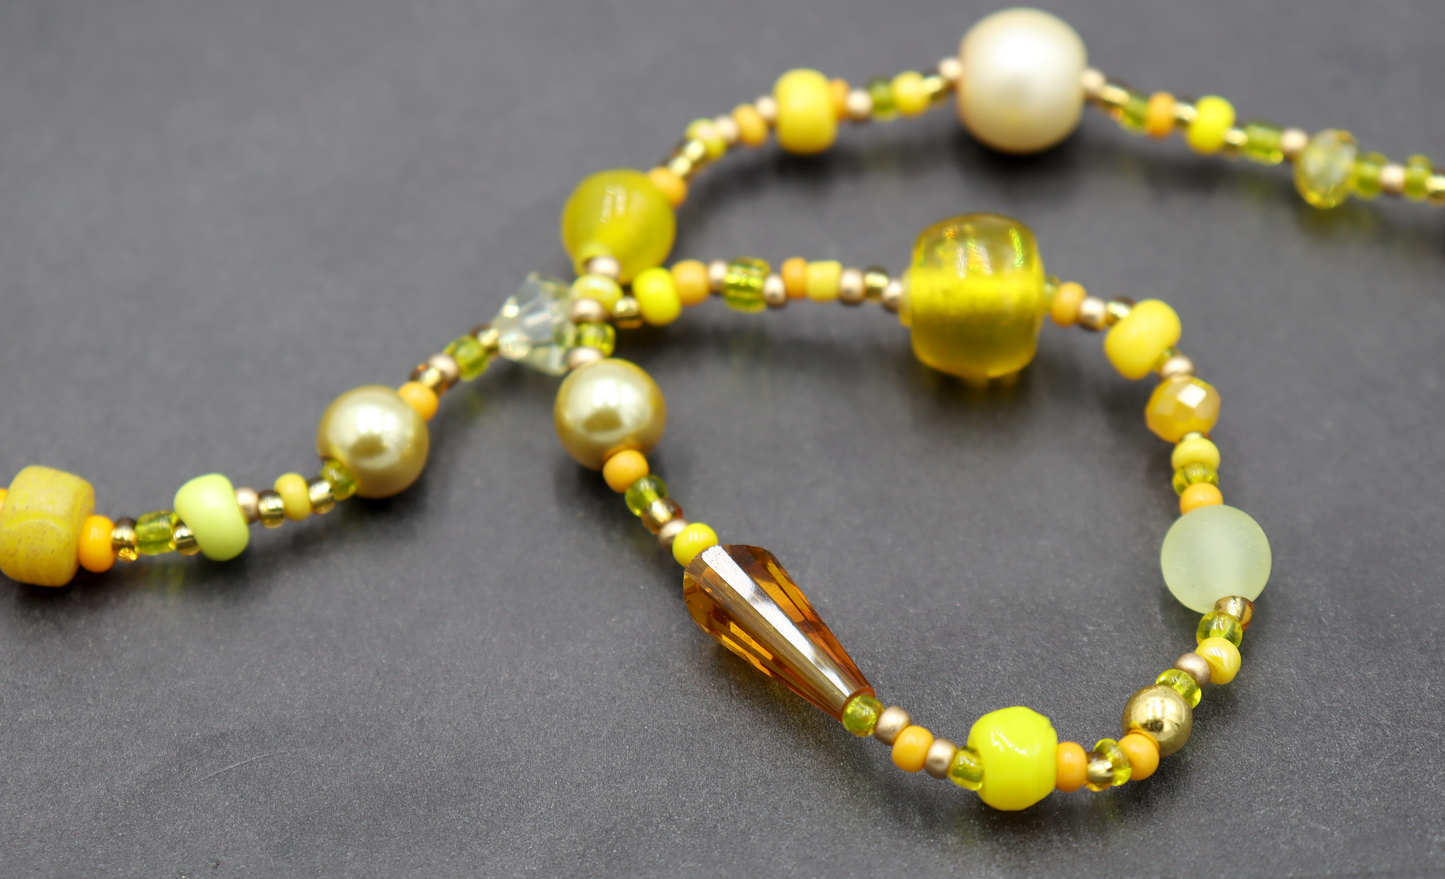 Call Me Mellow Yellow Long 36" Single Strand All Shades of Yellow Party Necklace by Monkey’s Mojo